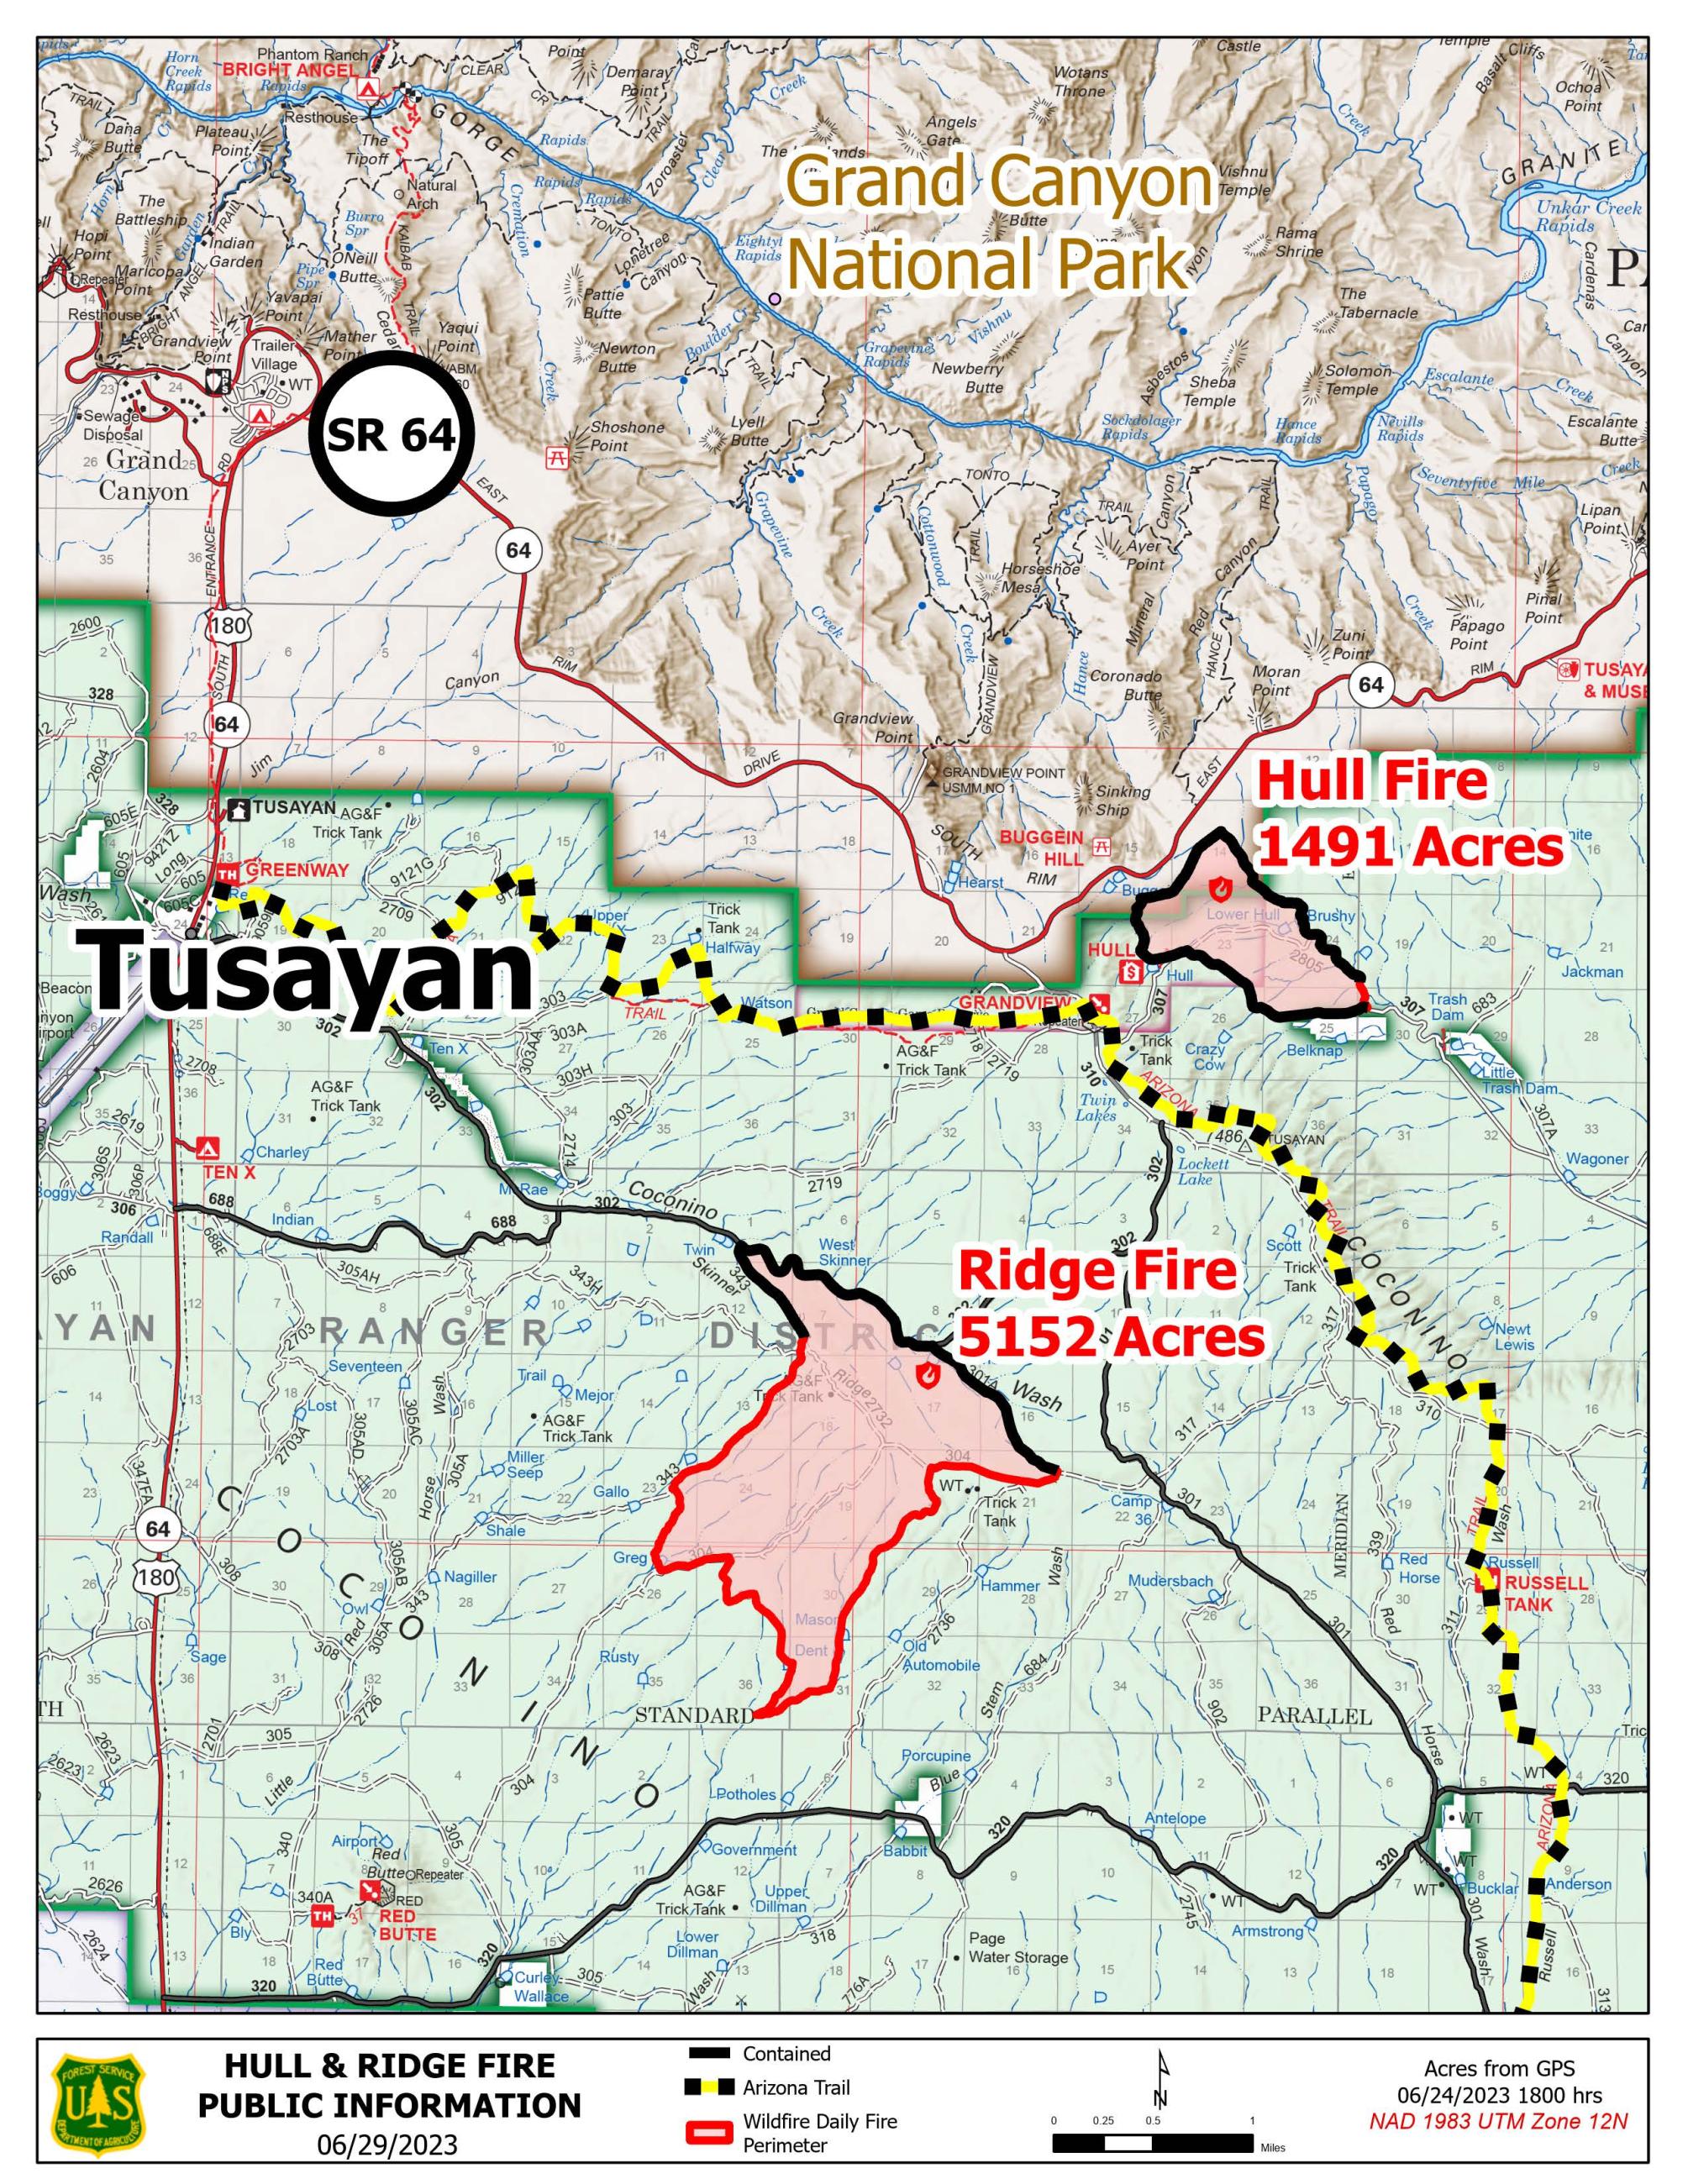 Map of the Ridge Fire and Hull Fire areas as of 7/9